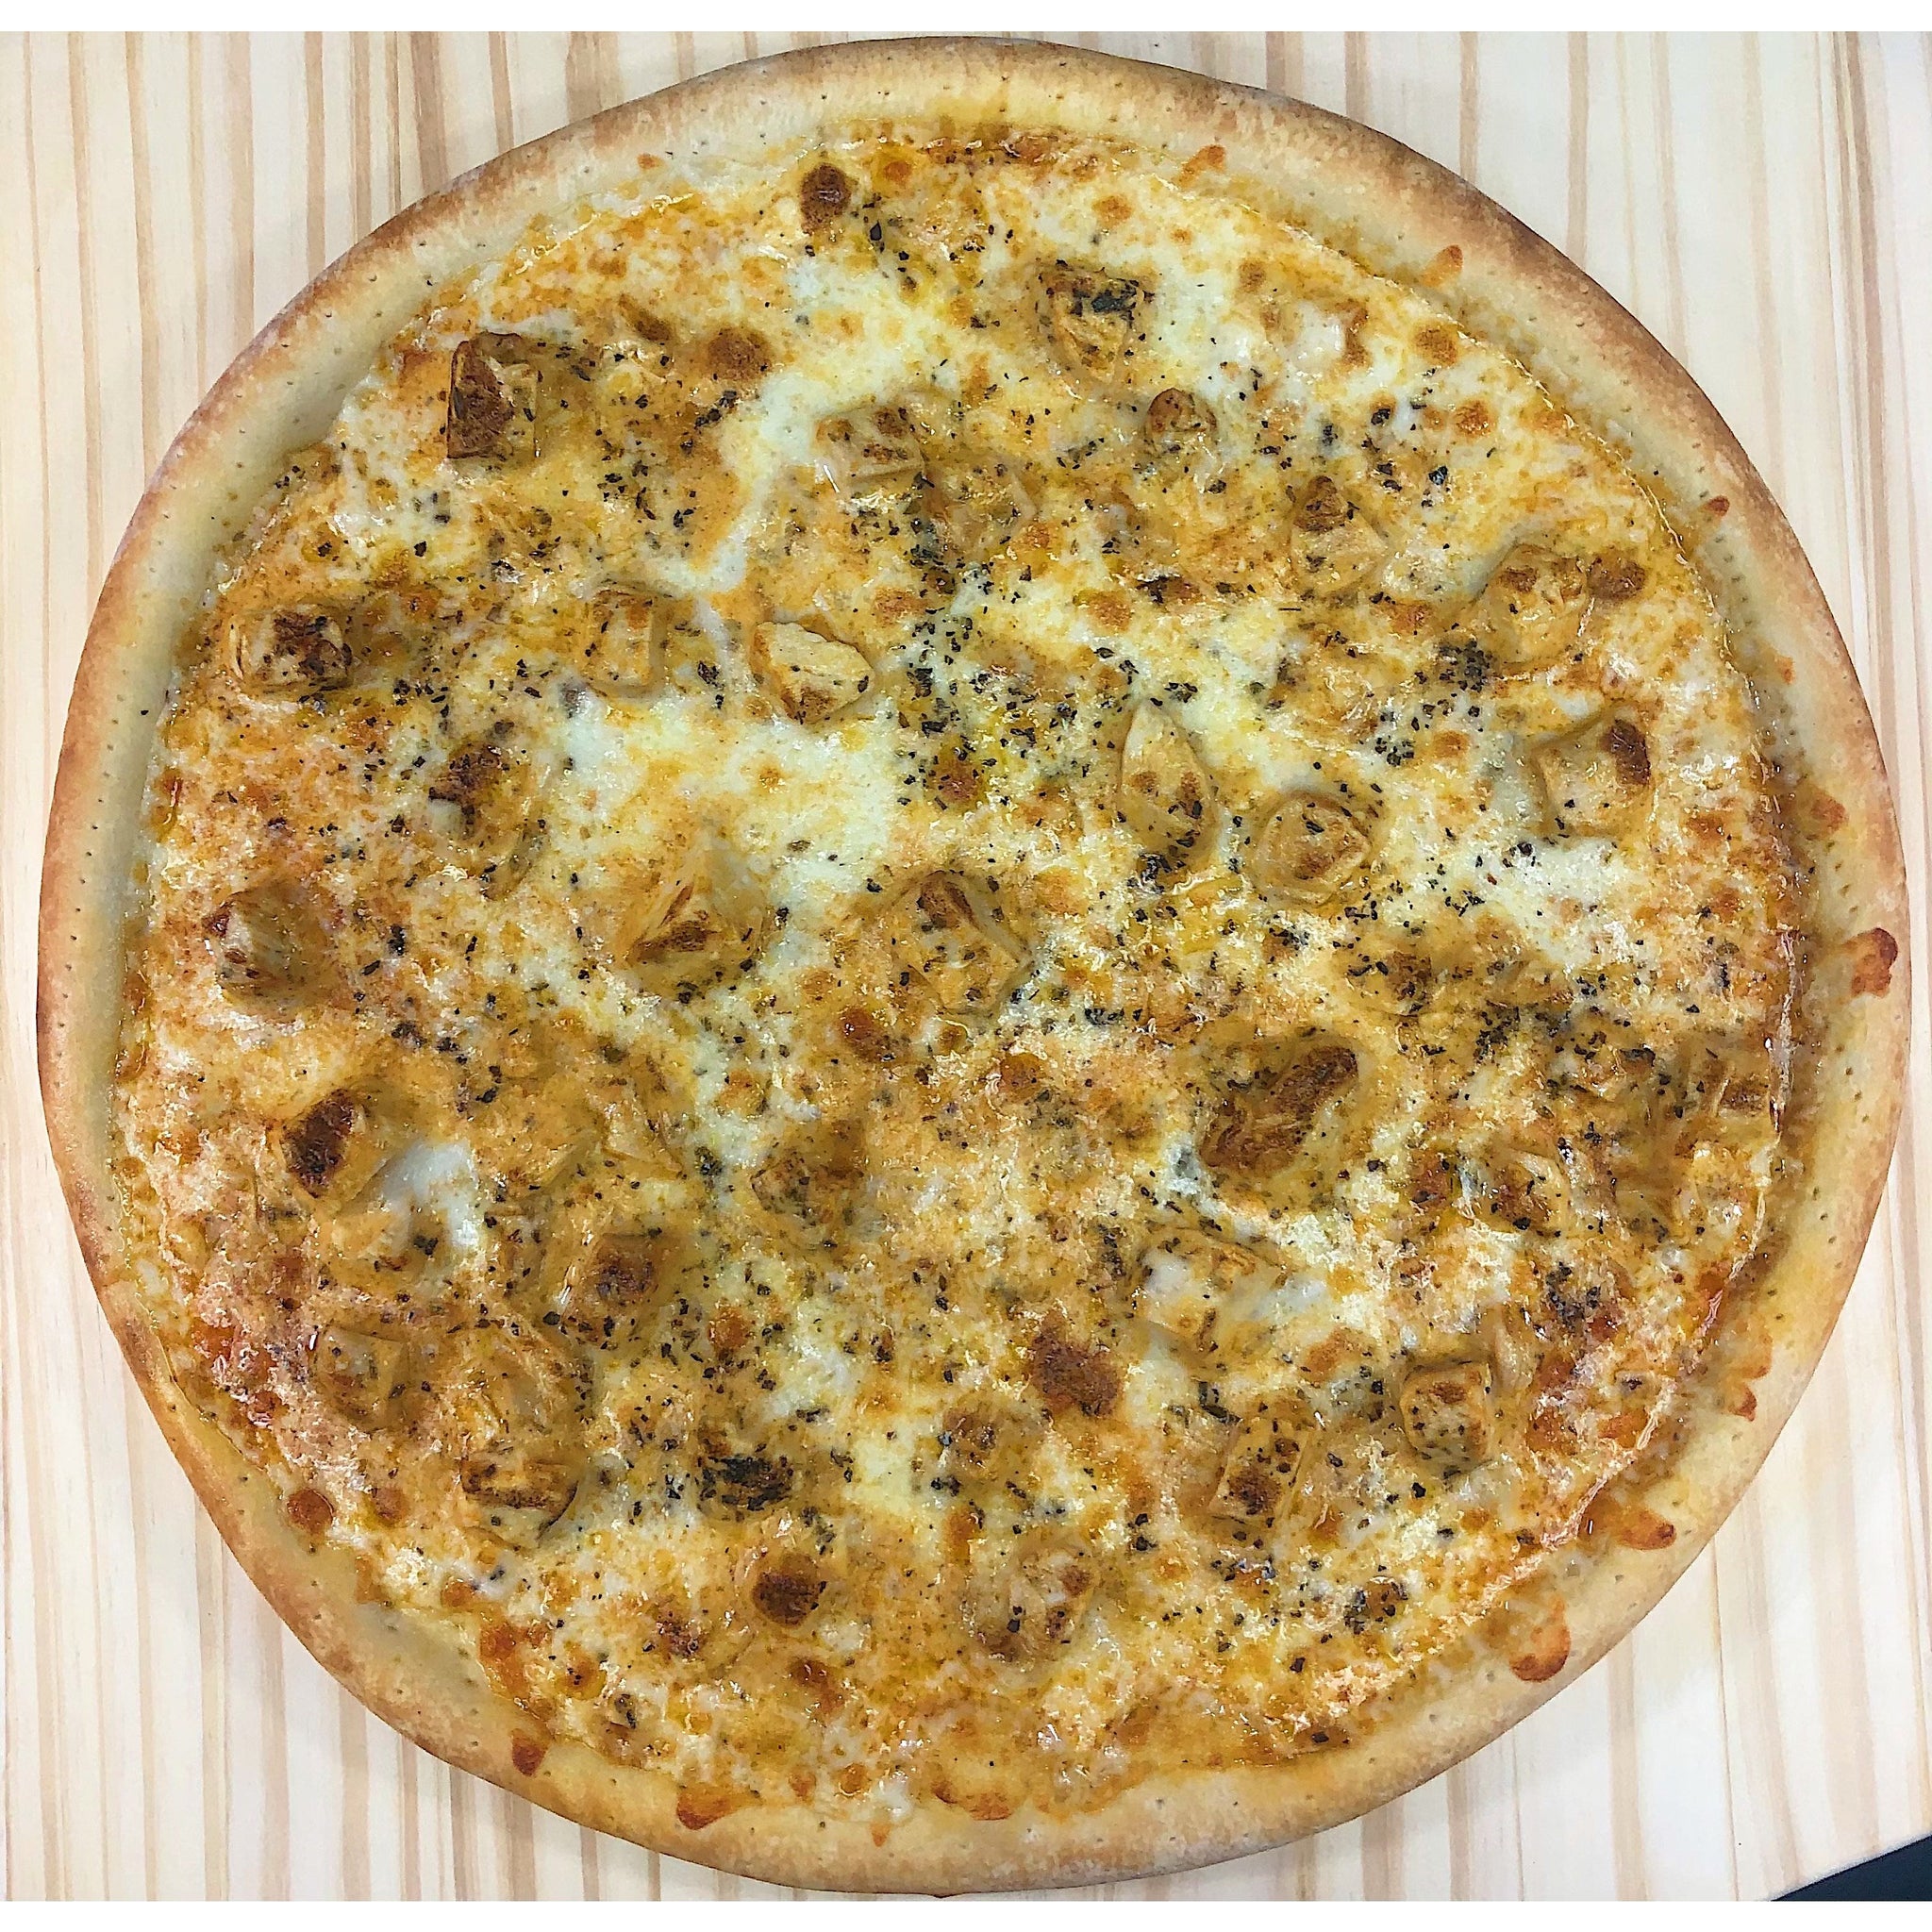 An image of a Buffalo Chicken Pizza. The pizza has a thin and crispy crust topped with zesty Buffalo sauce. It is generously covered with seasoned grilled chicken pieces, melted cheese, and thinly sliced red onions. The pizza is finished with a drizzle of ranch or blue cheese dressing and a sprinkle of fresh cilantro. The combination of spicy Buffalo flavors, savory chicken, and melted cheese creates a mouthwatering pizza.